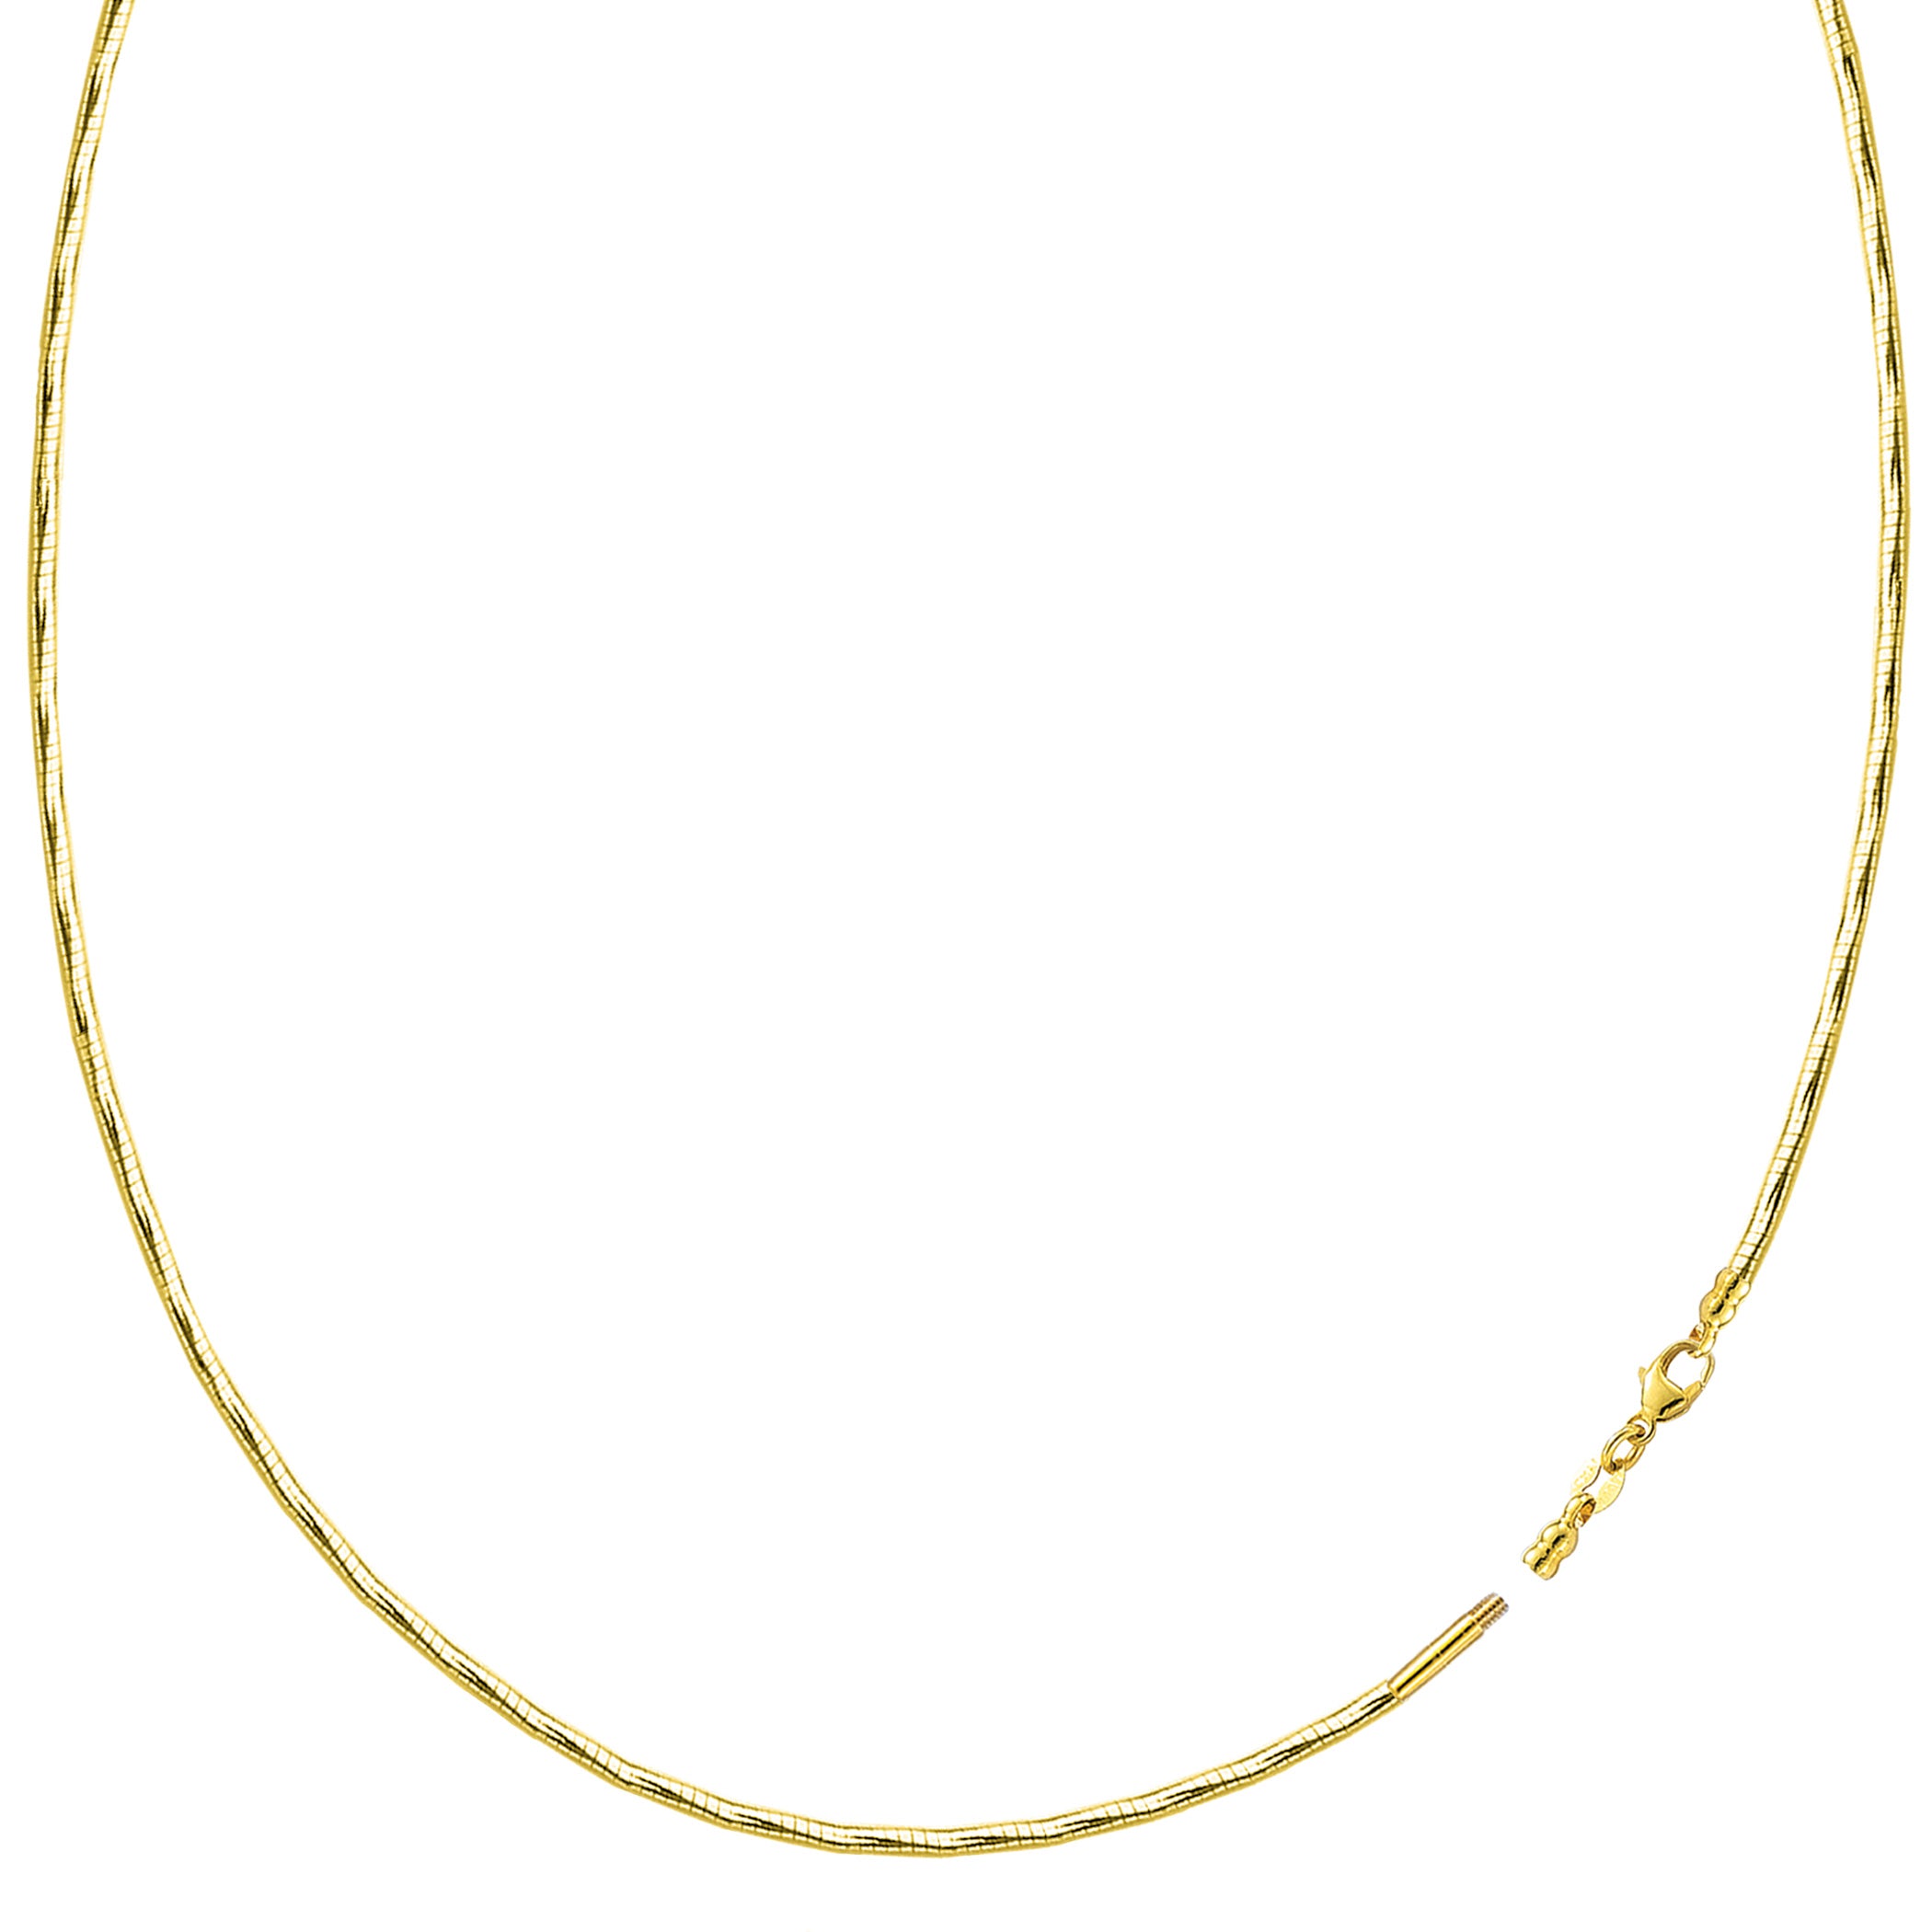 Diamond Cut Omega Chain Necklace With Screw Off Lock In 14k Yellow Gold fine designer jewelry for men and women